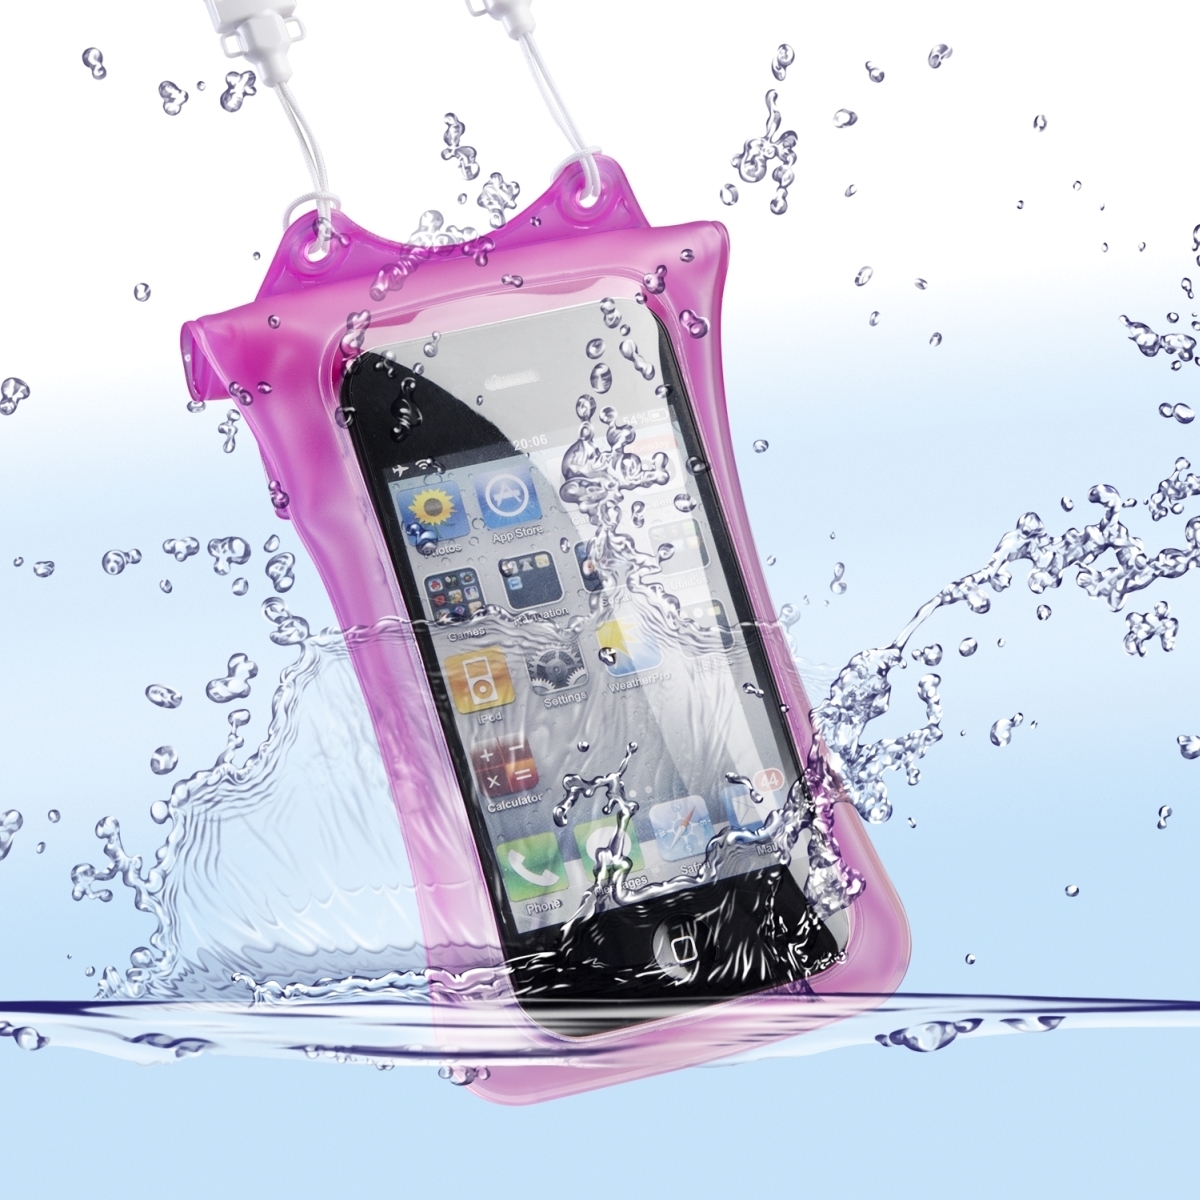 WP-i10 Underwater Bag for iPhone & iPod, pink